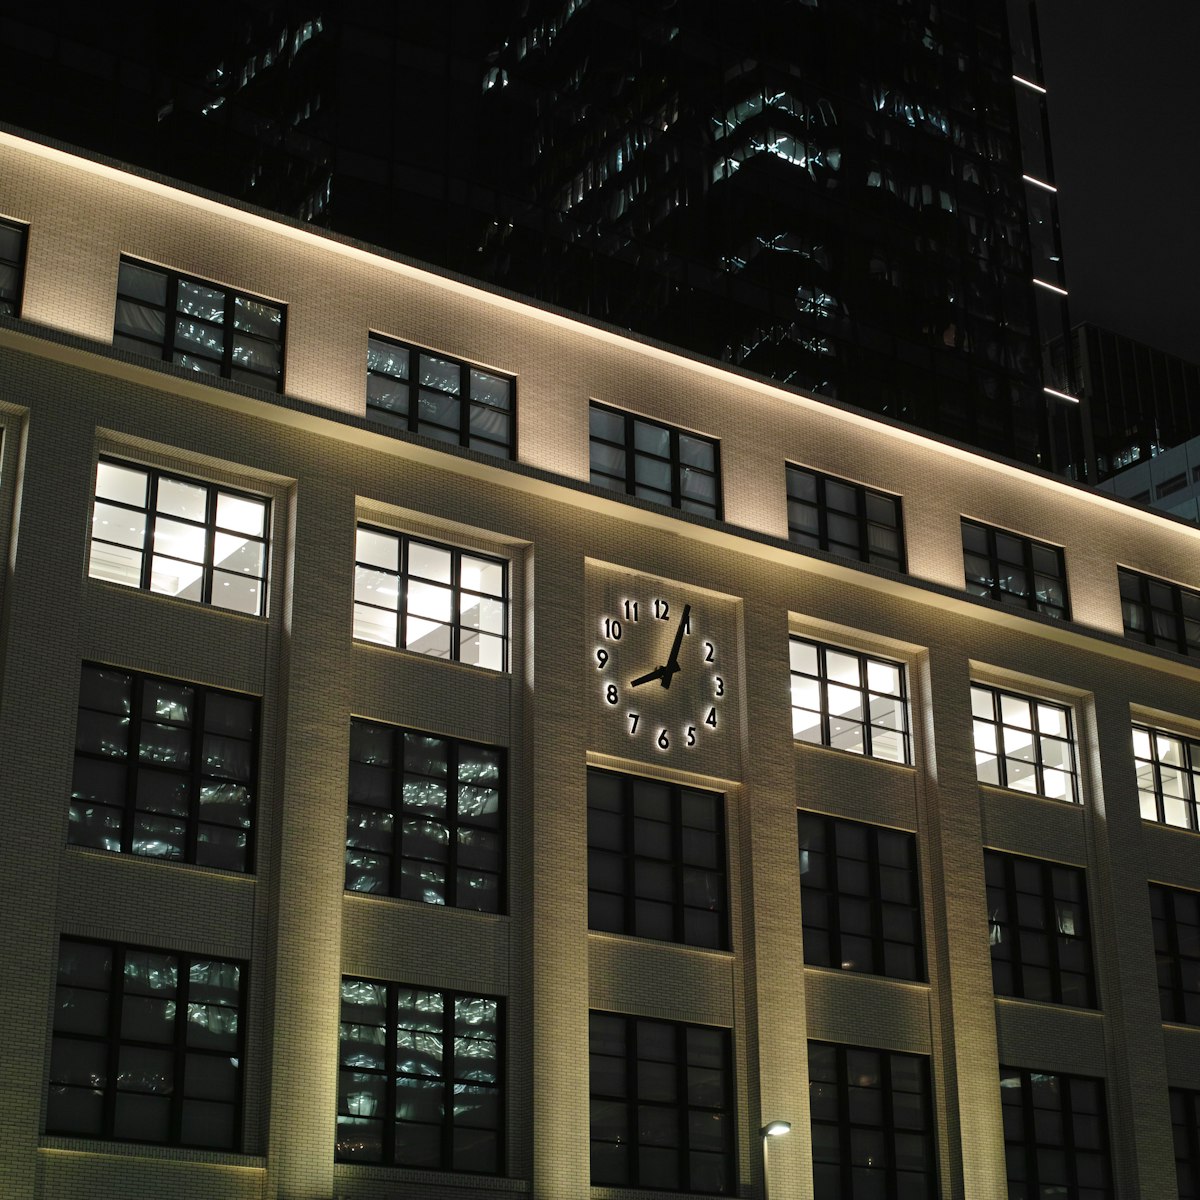 Tokyo central post office at night; Shutterstock ID 284205230; Your name (First / Last): Josh Vogel]; GL account no.: 56530; Netsuite department name: Online Design; Full Product or Project name including edition: Digital Content/Sights